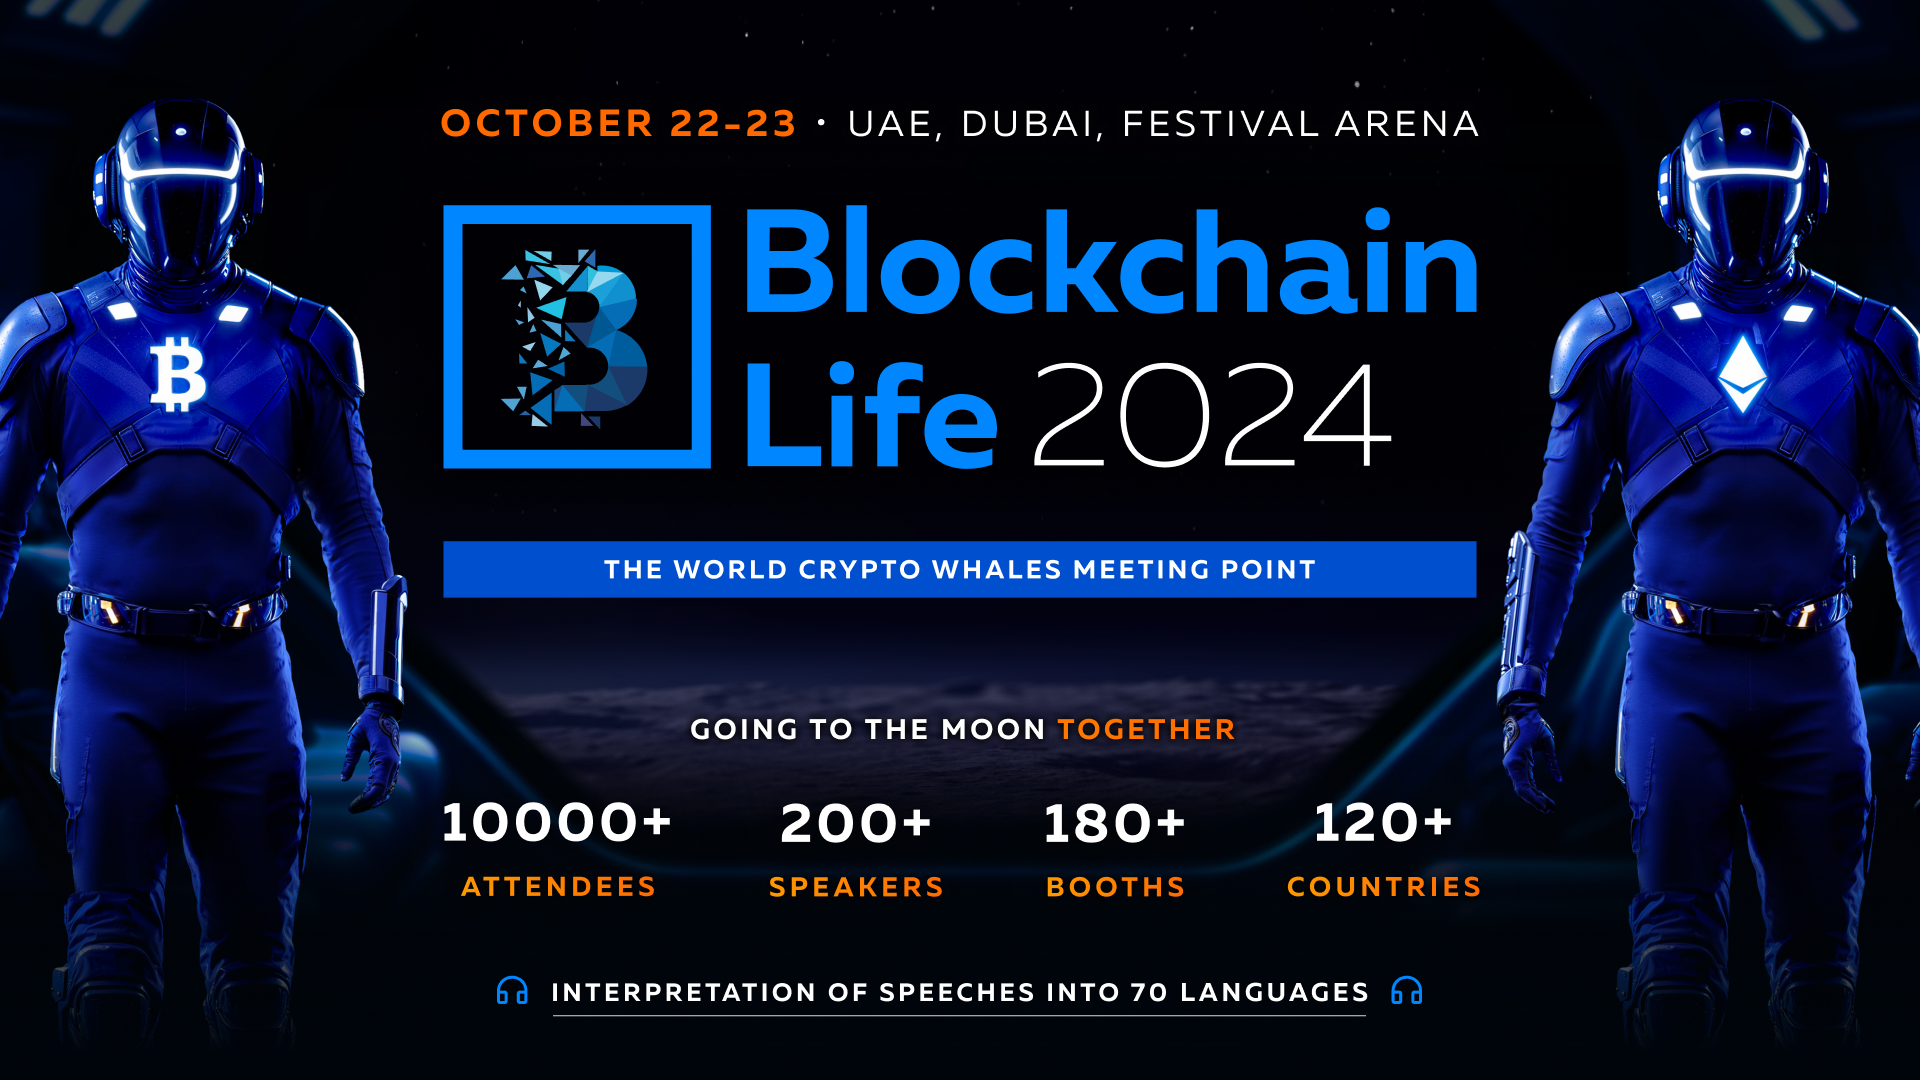 Blockchain Life 2024 in Dubai Unveils First Speakers, Featuring Industry Leaders from Tether, Ledger, TON, Animoca Brands and More